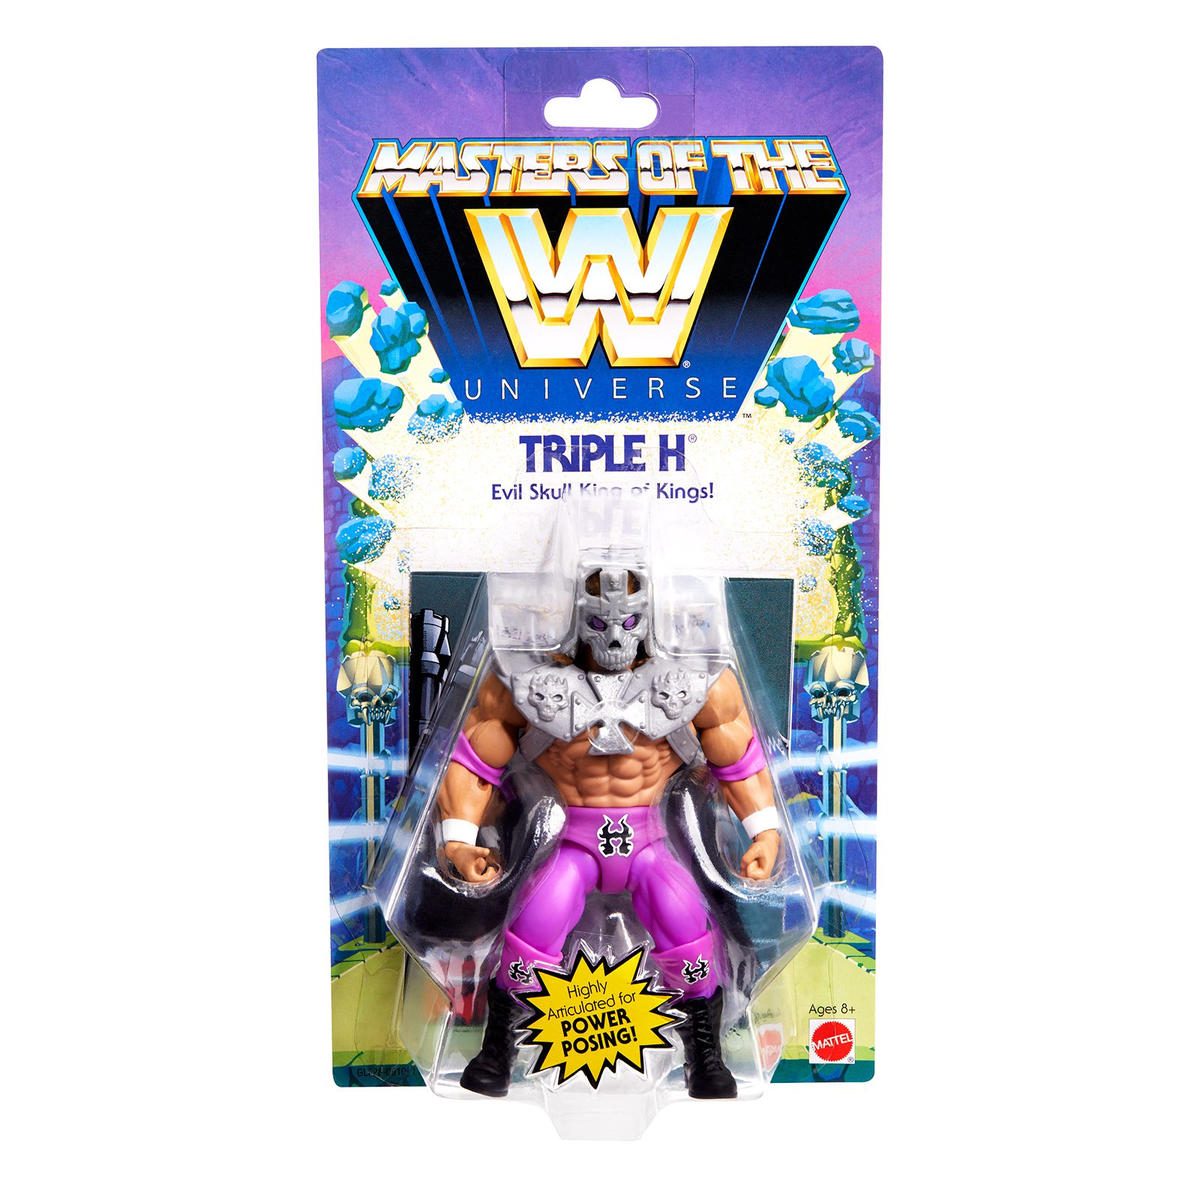 2019 Mattel Masters of the WWE Universe Series 1 Triple H [Exclusive]